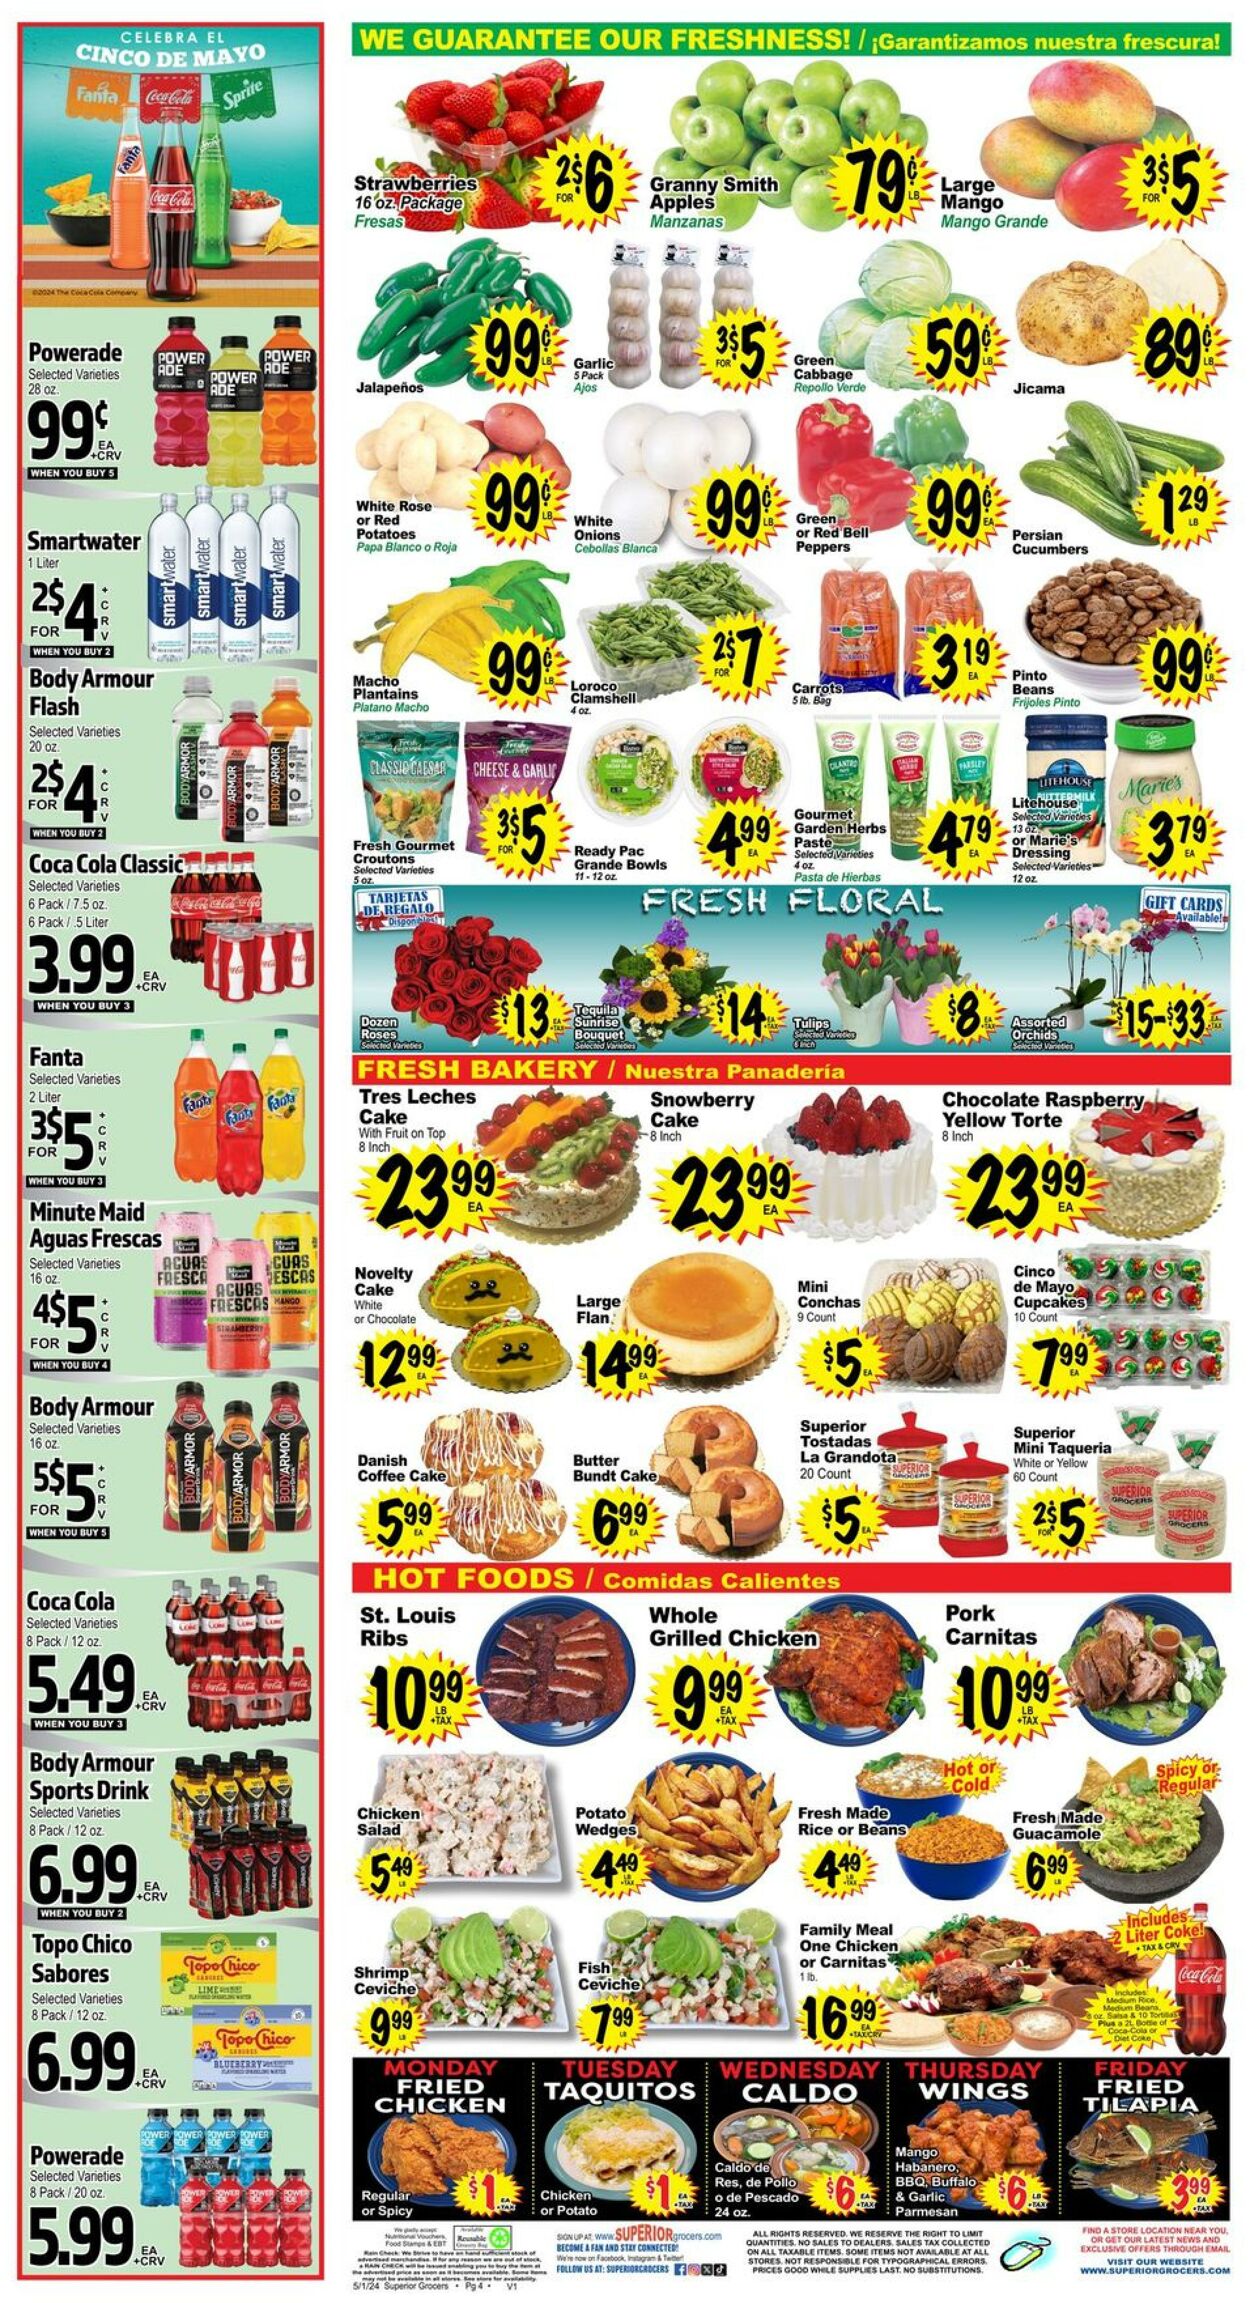 Weekly ad Superior Grocers 05/01/2024 - 05/07/2024